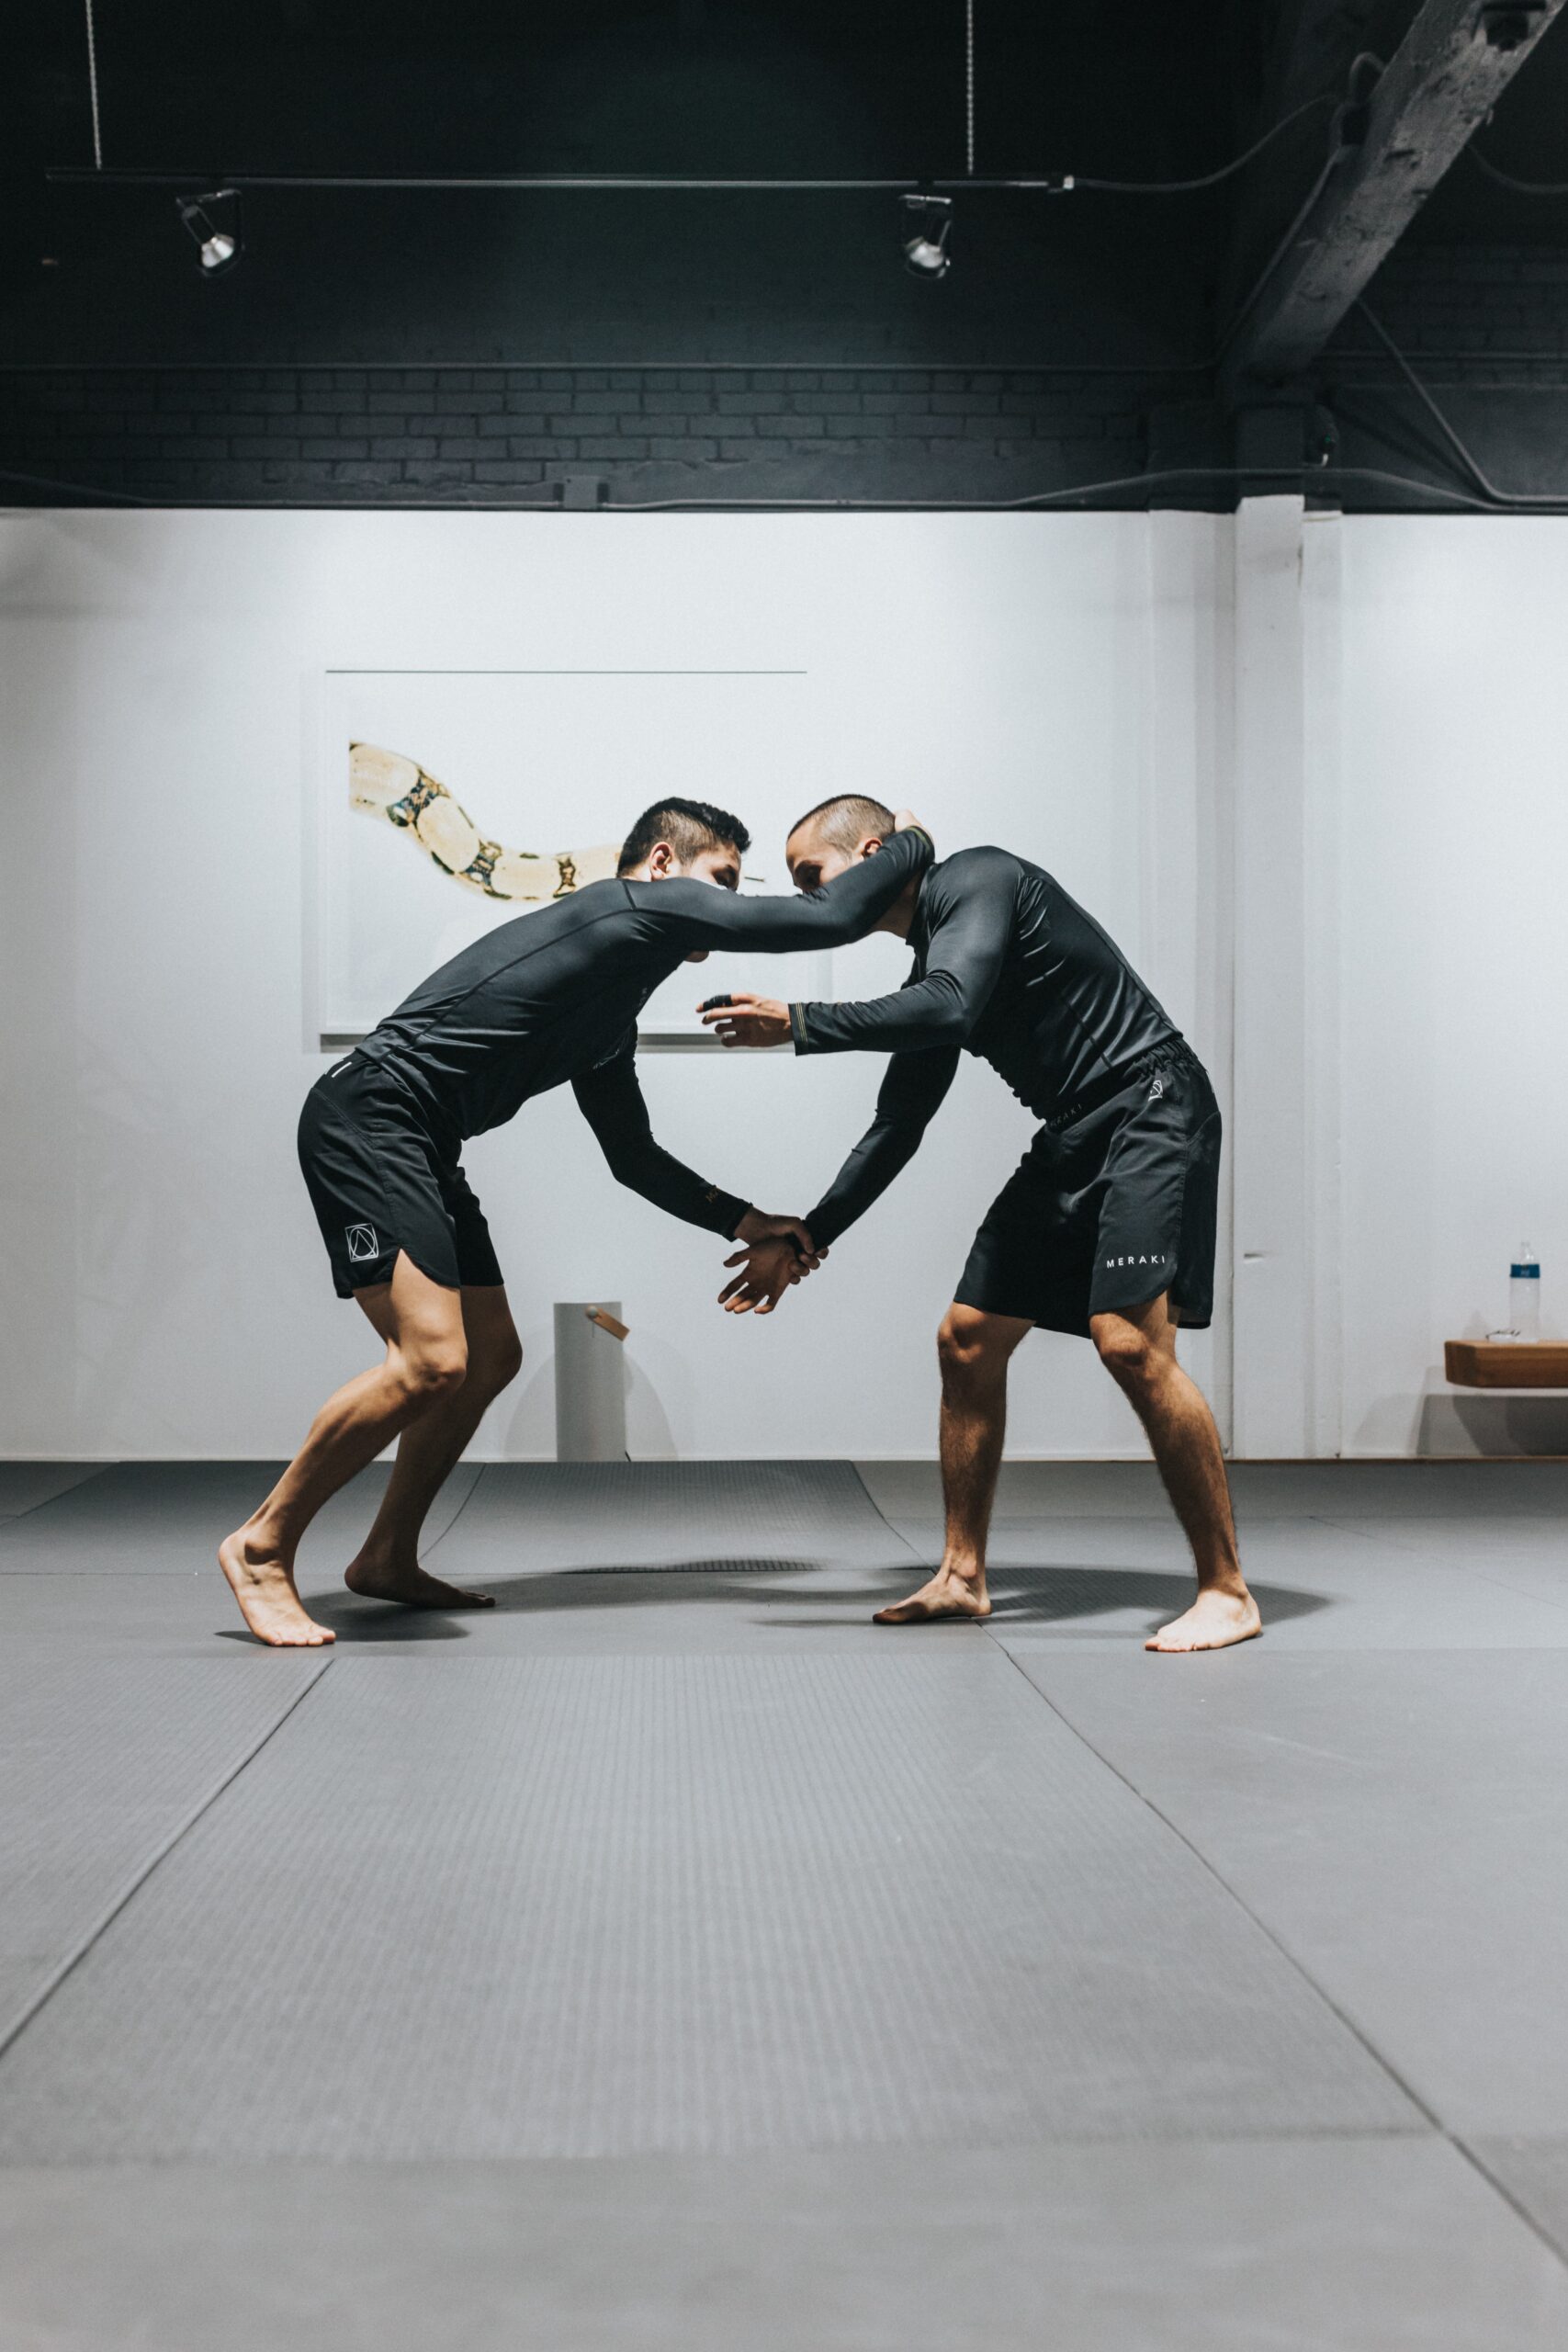 Build Your Own Martial Arts StudioFor Practice at Home